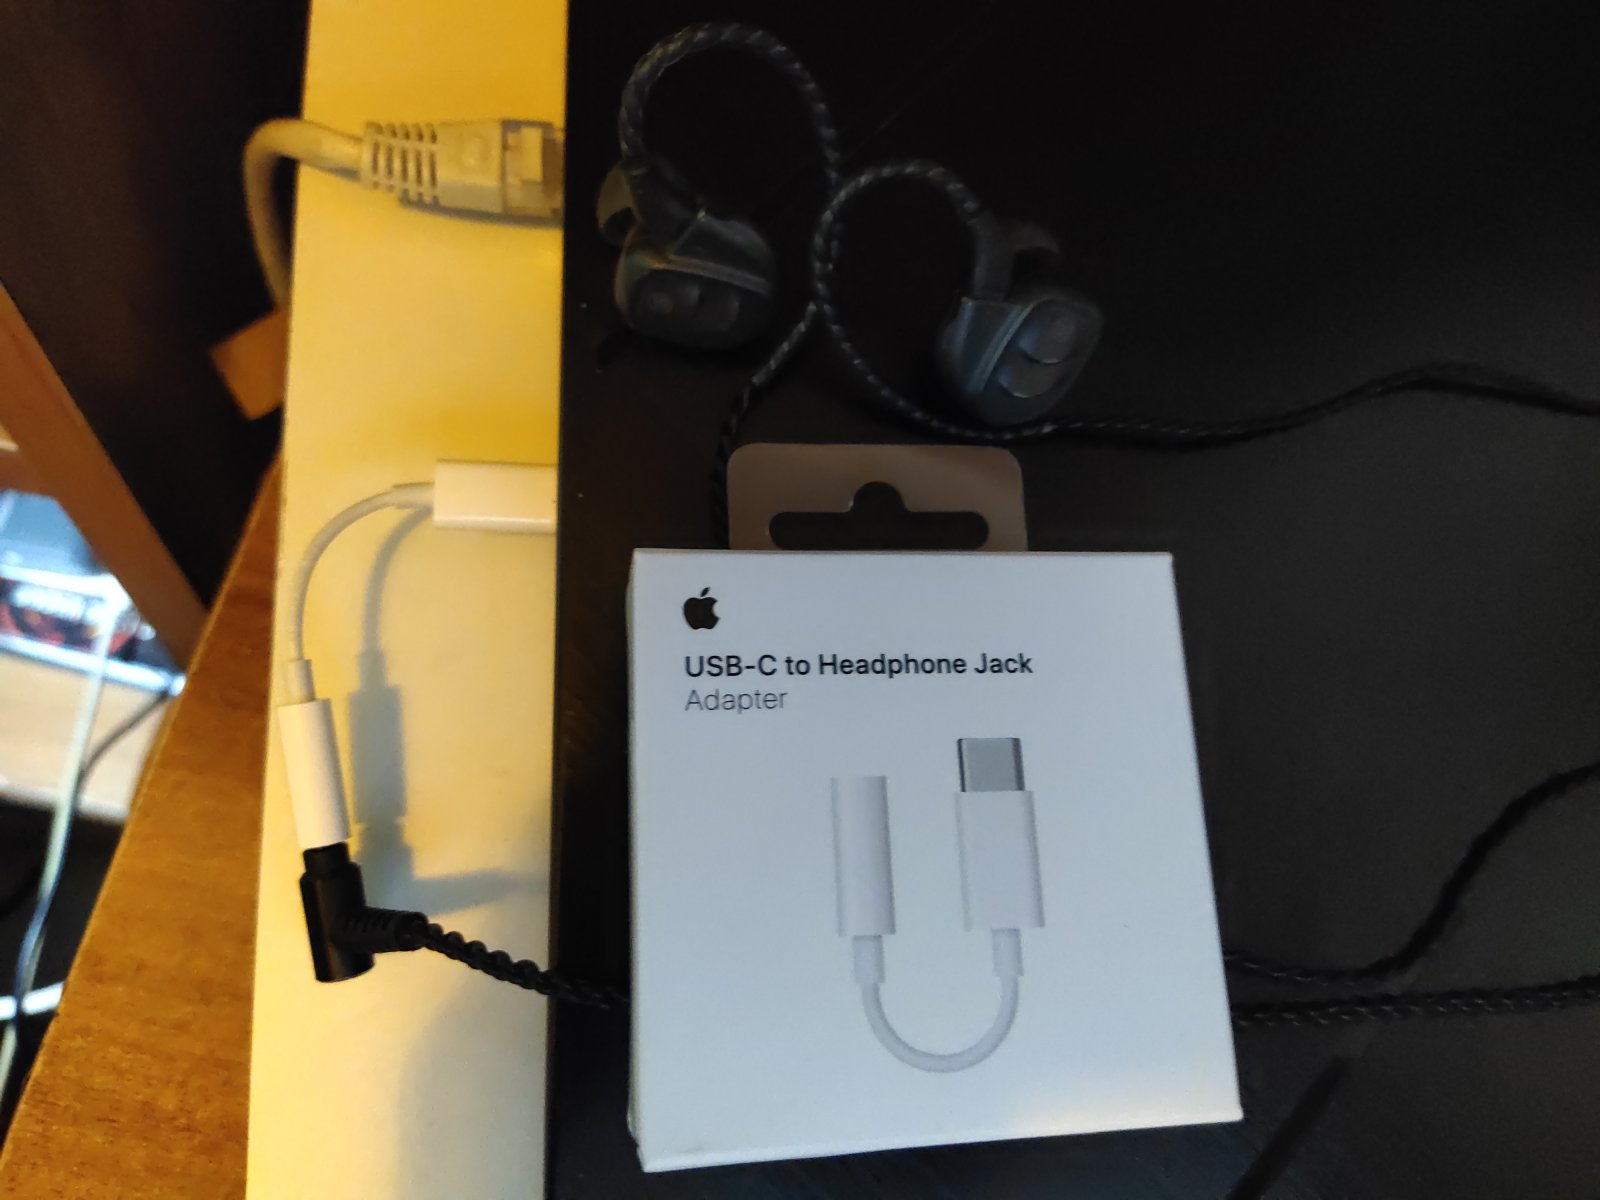 Apple USB-C to 3.5 mm Headphone Jack Adapter for iPhone and iPad 